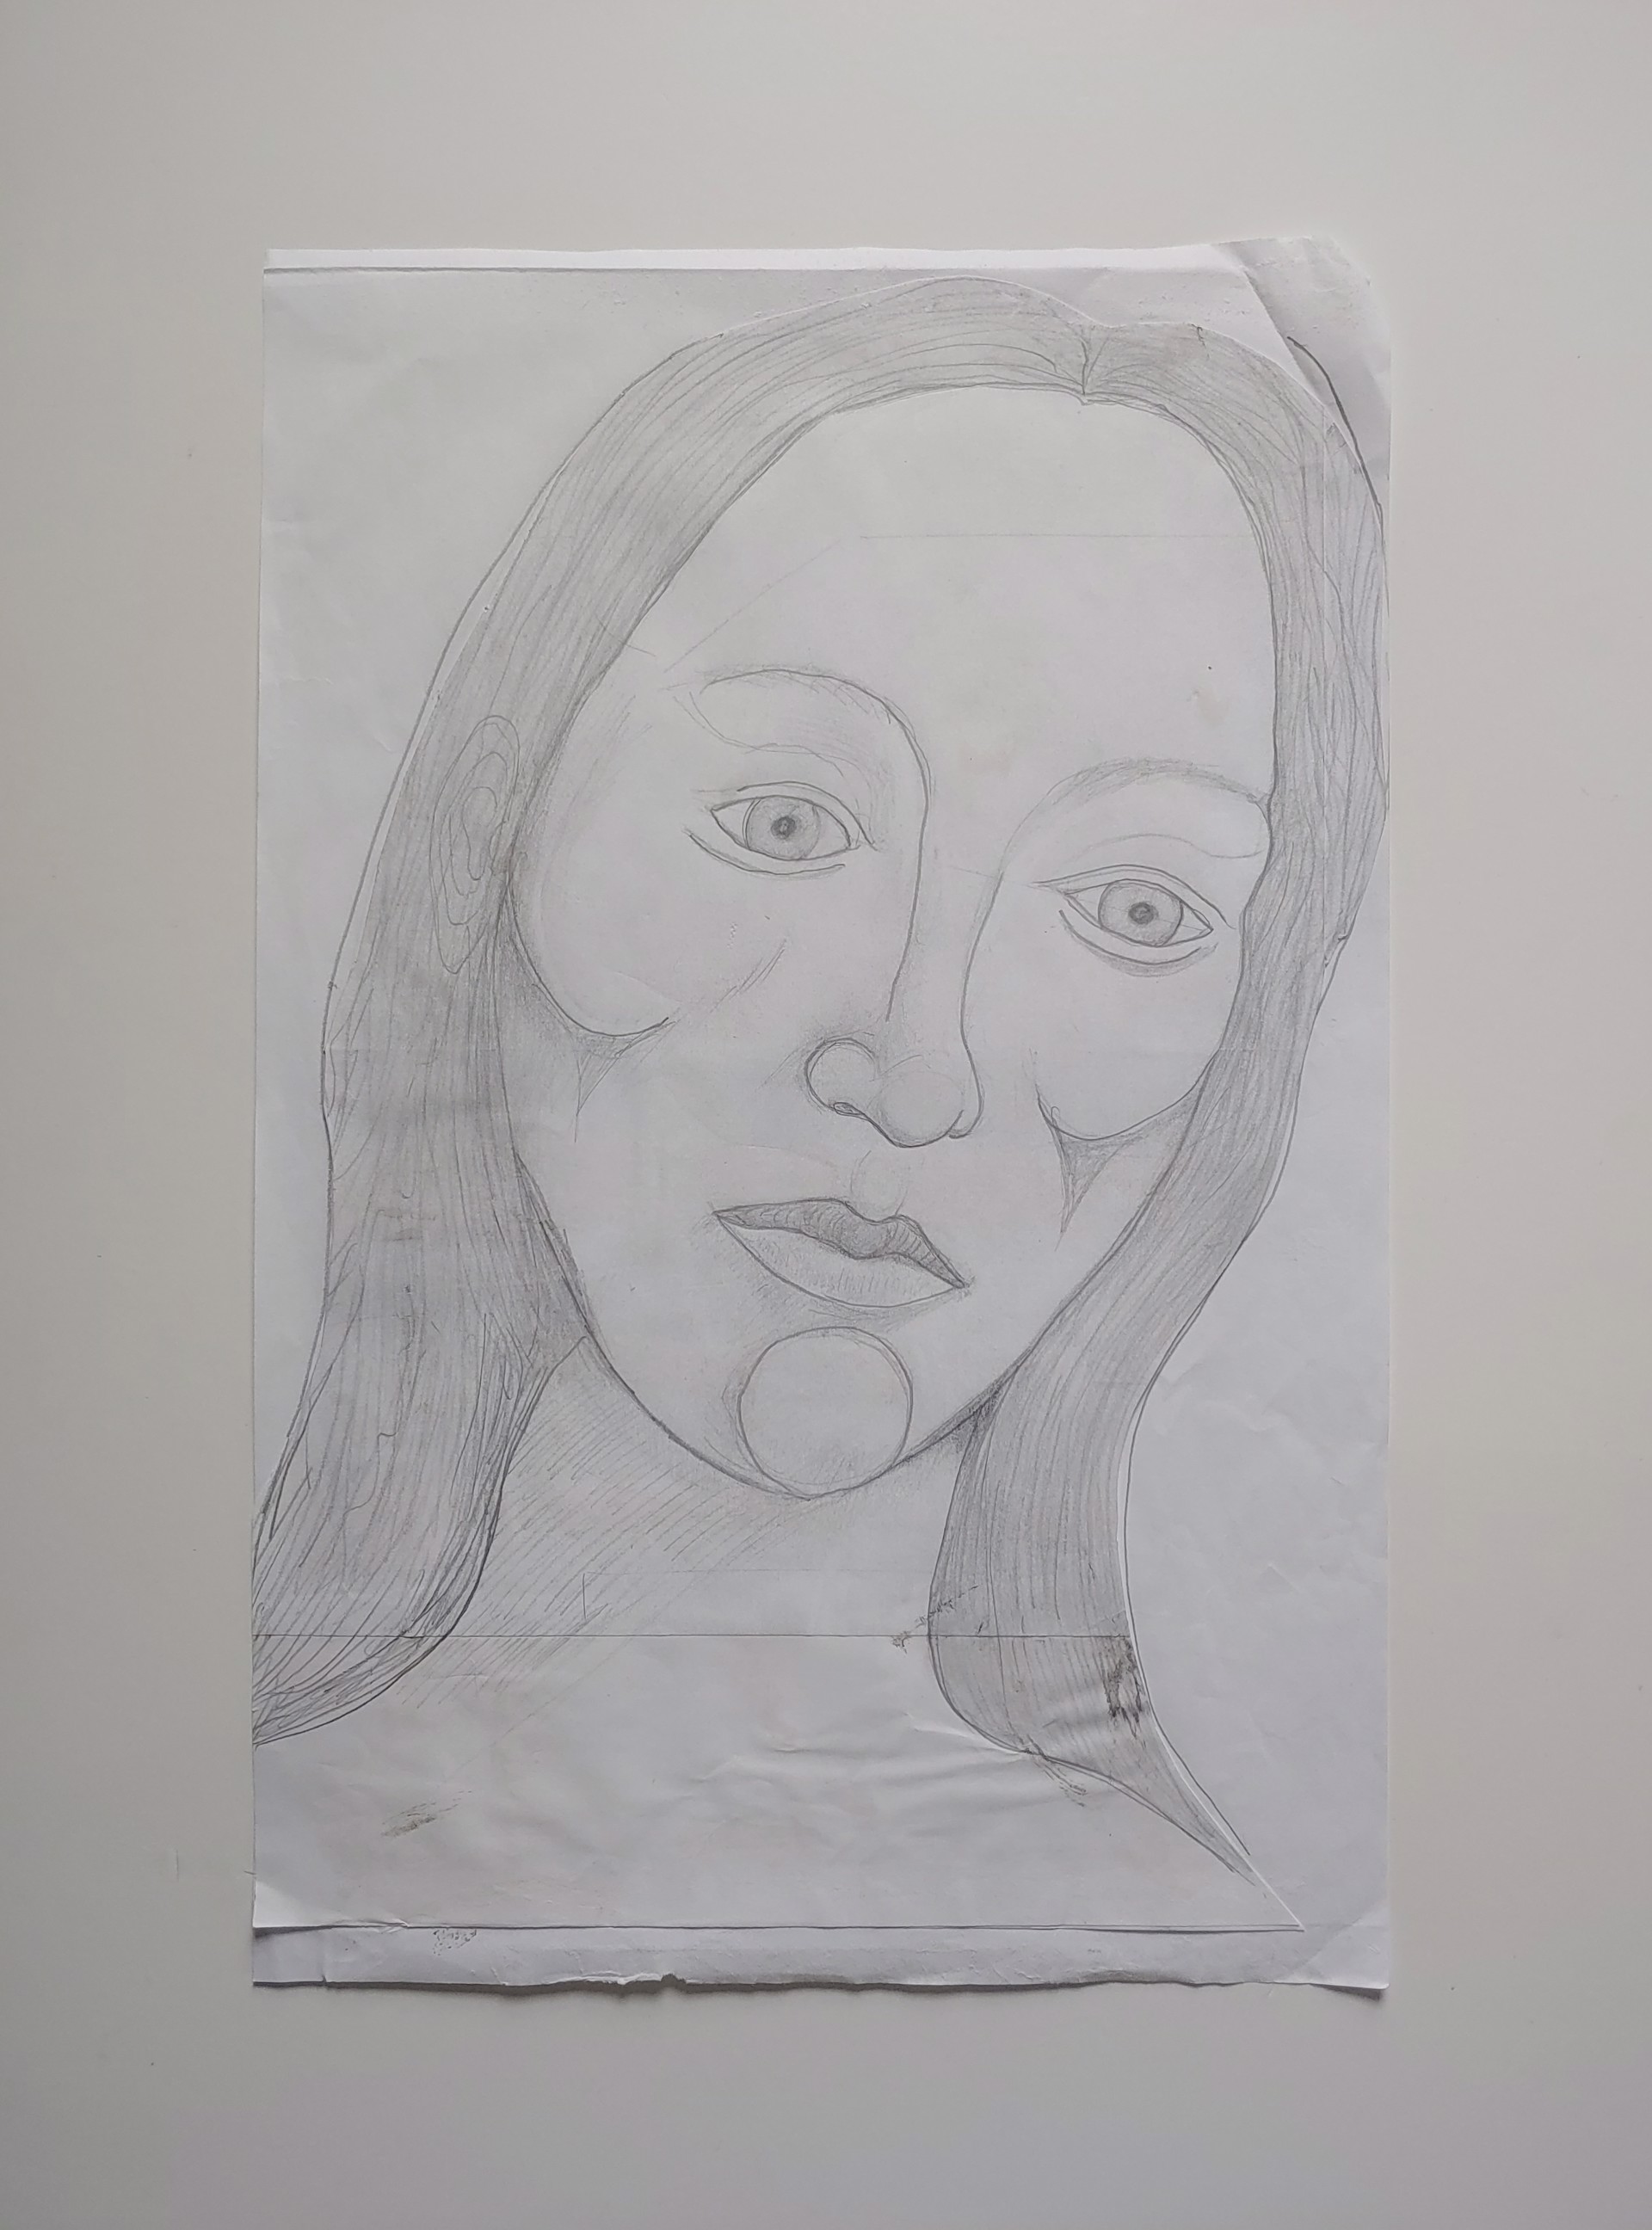 Woman's Portrait in Graphite - Drawing by David Amdur